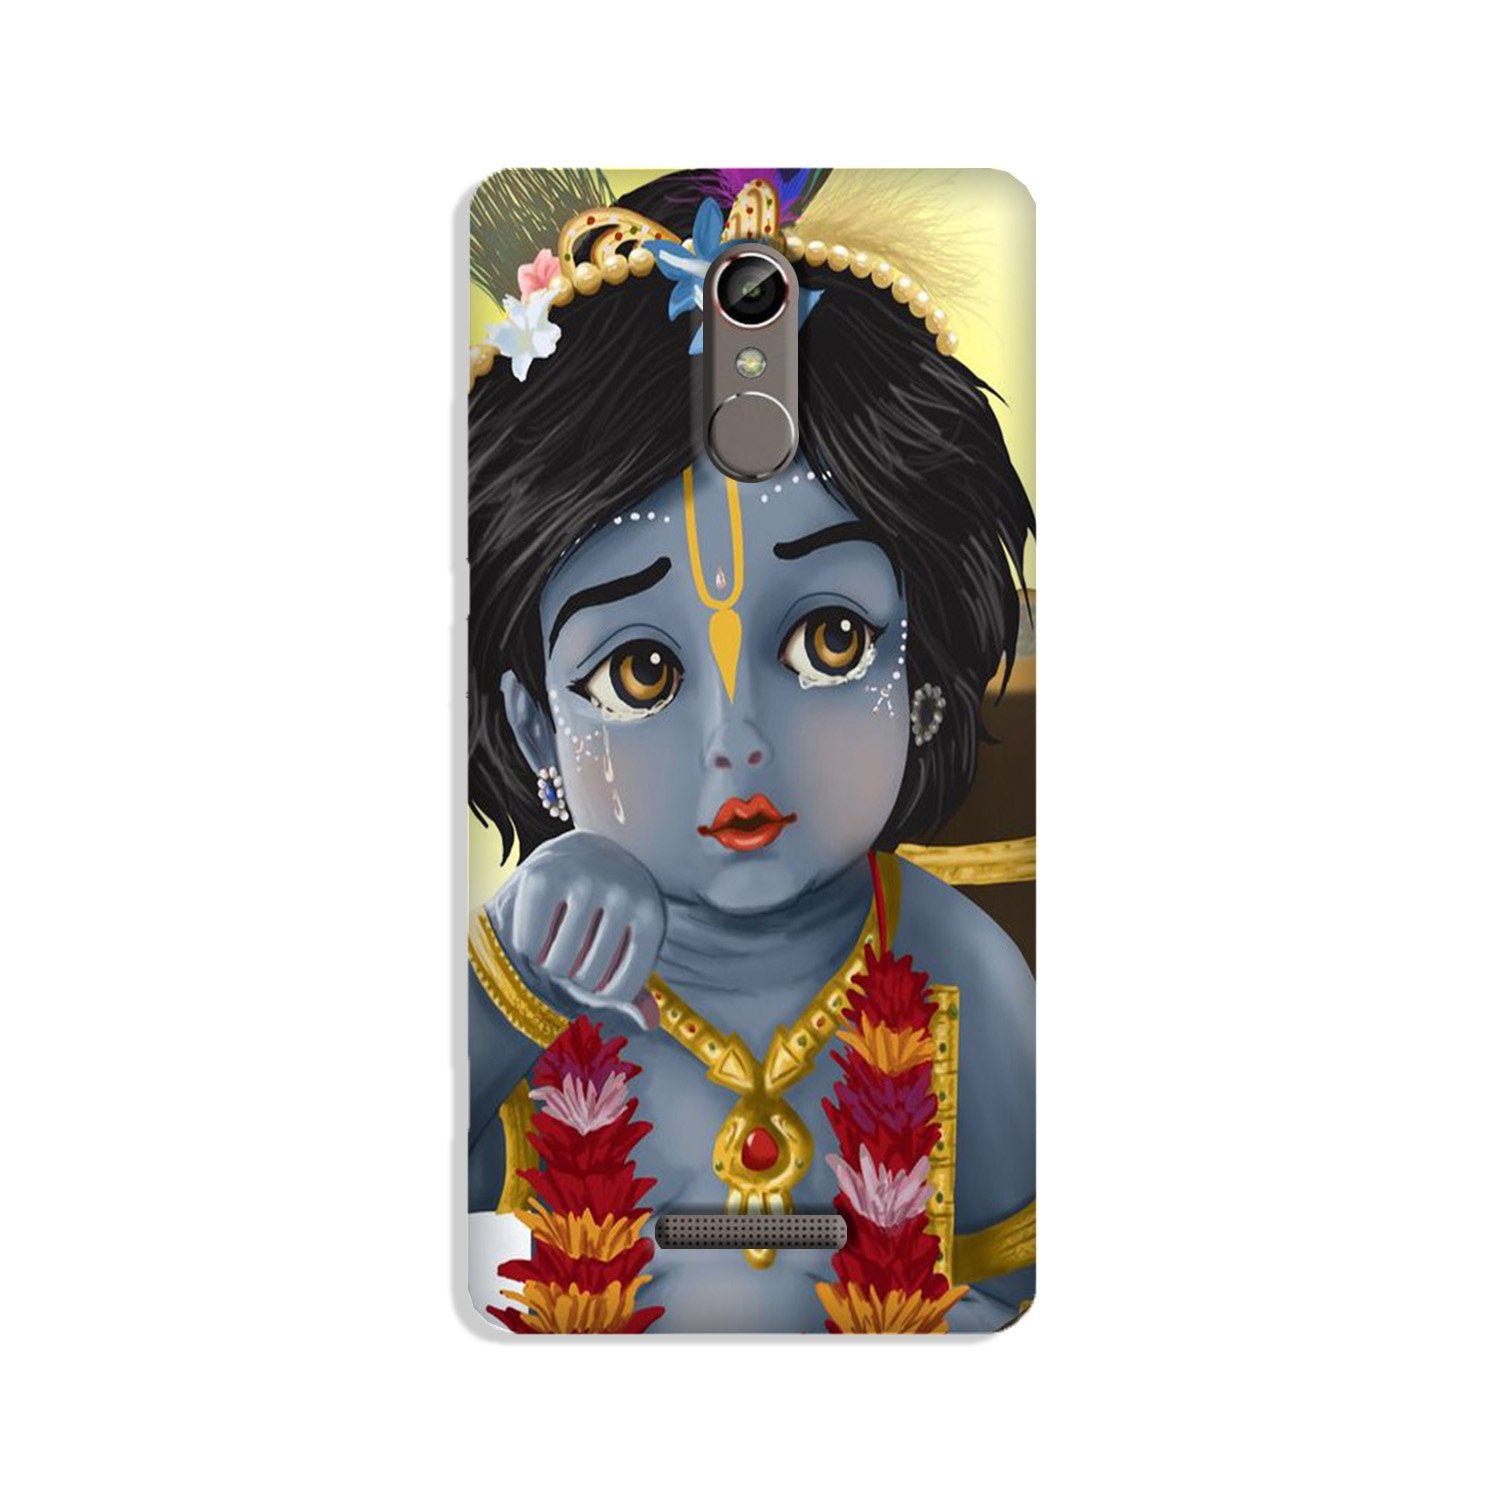 Bal Gopal Case for Gionee S6s